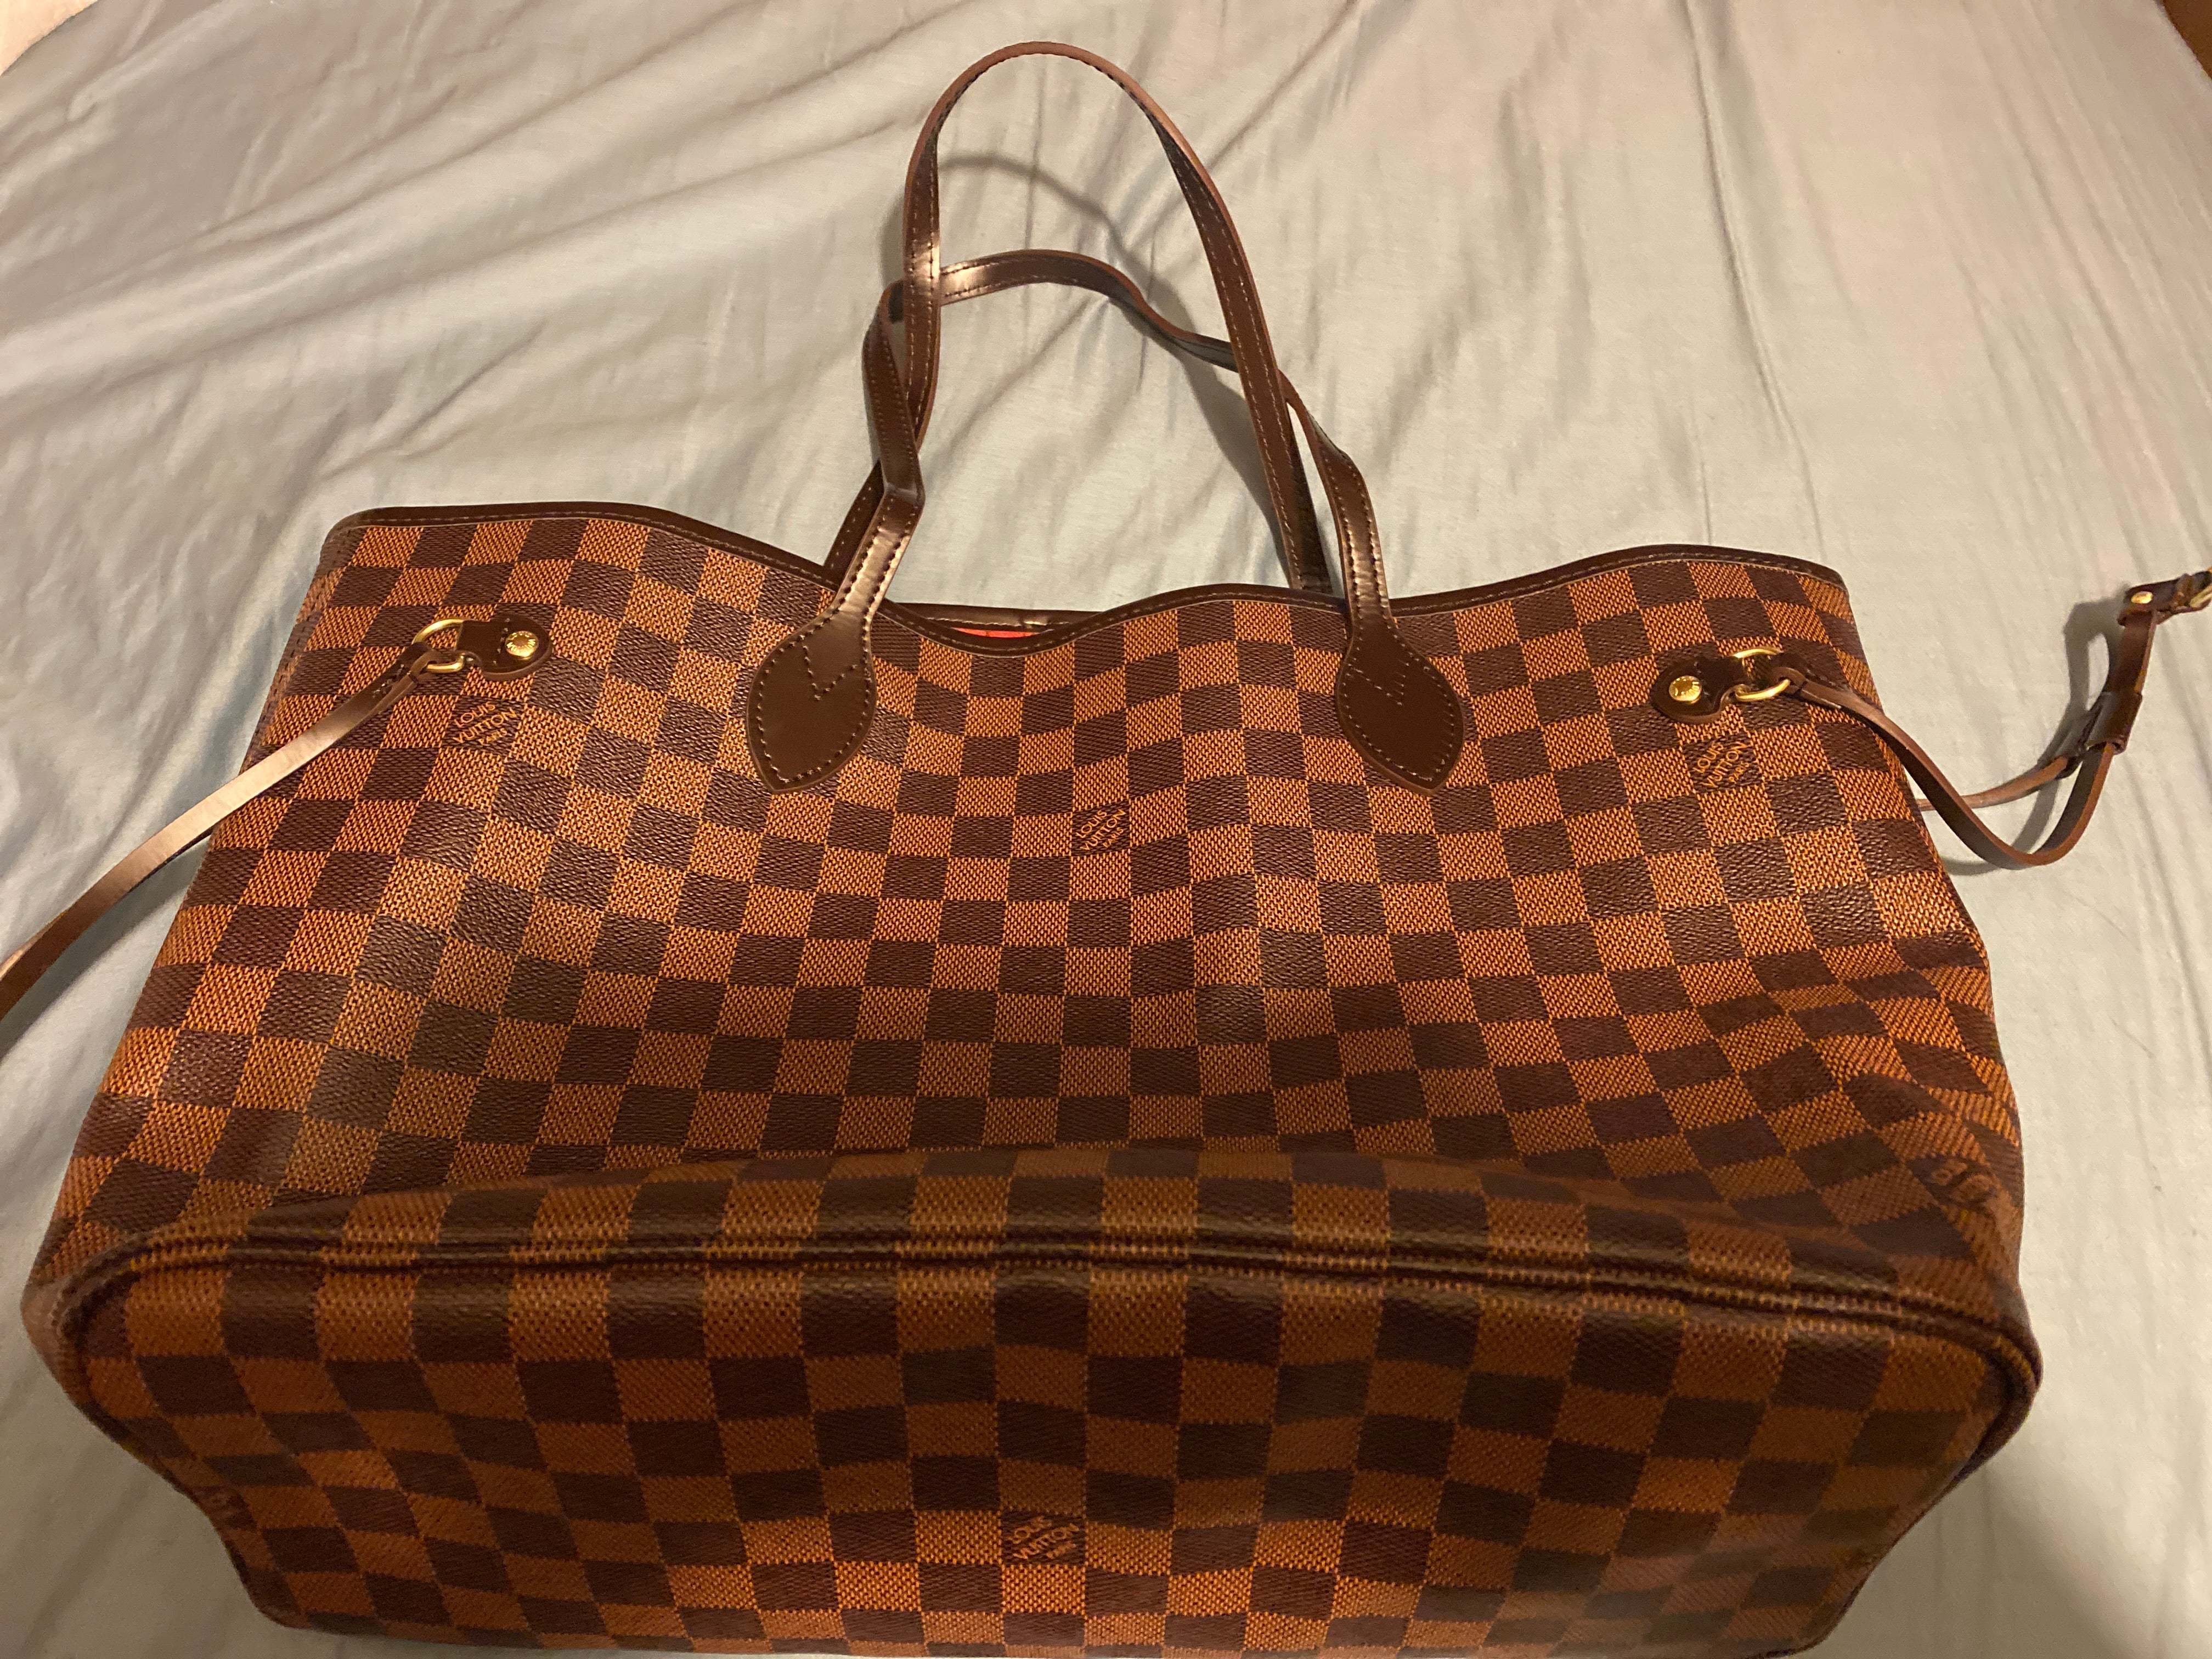 Fake Louis Vuitton Neverfull vs Real: Important Details You Should Definitely Pay Attention To (With Photo Examples) Fake Neverfull Damier Ebene front view